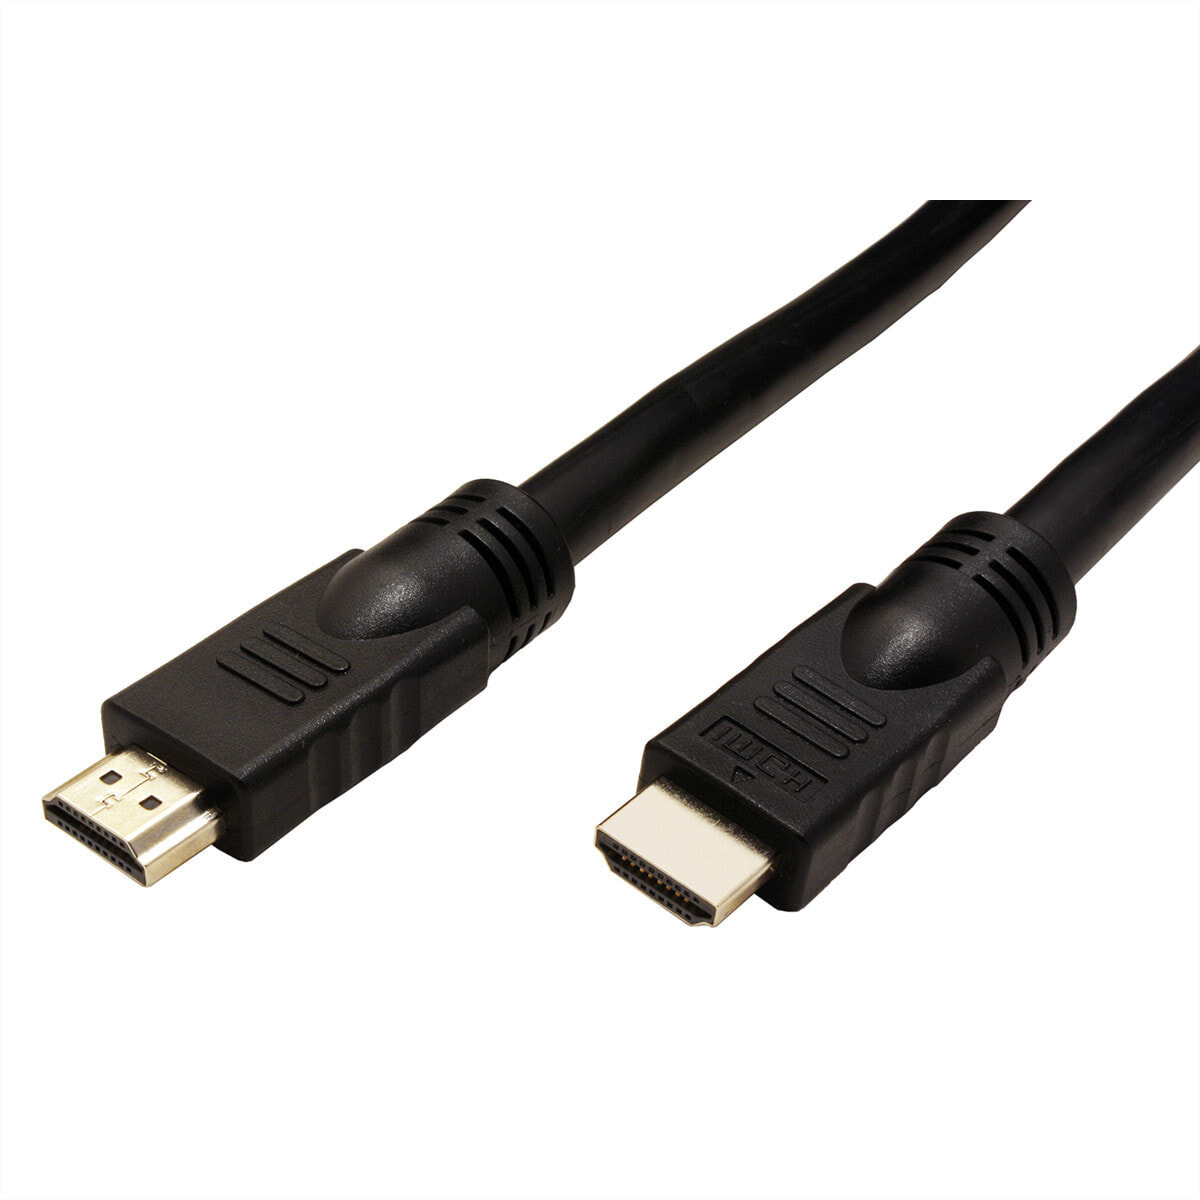 ROTRONIC-SECOMP UHD HDMI 4K Kabel mit Repeater 20 m 14.01.3455 - Cable - Digital/Display/Video